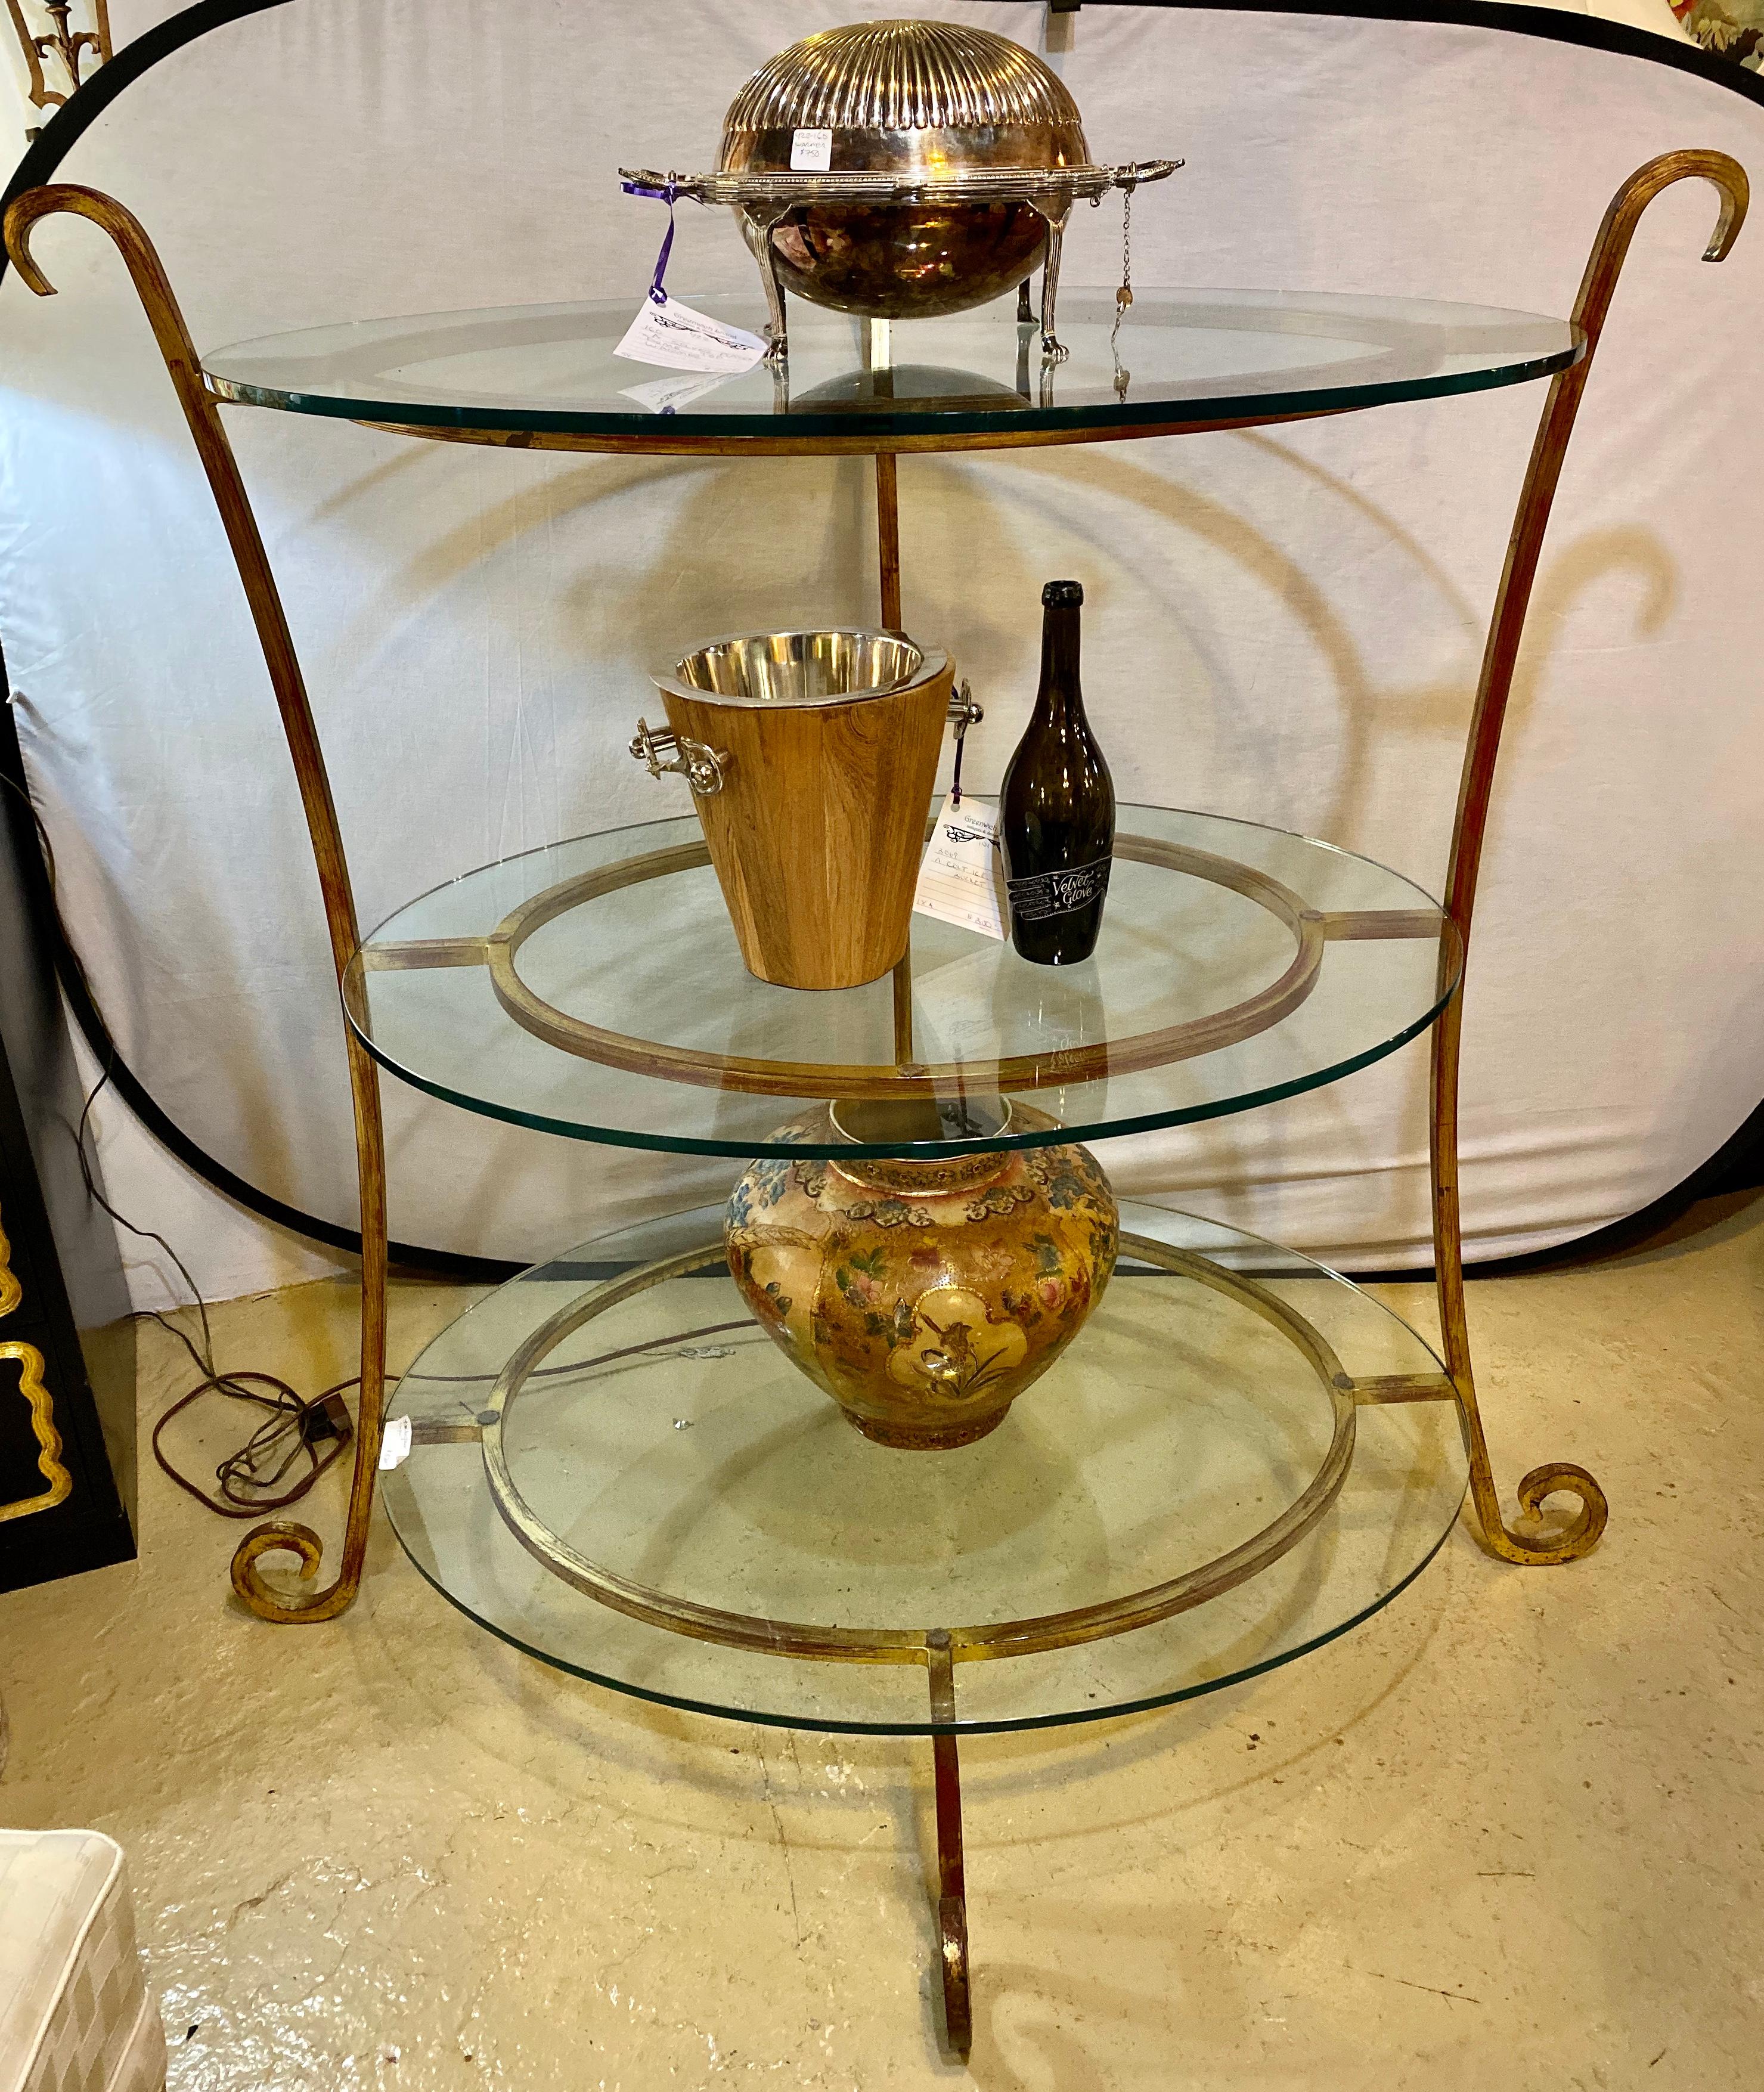 Three-tier glass and gilt metal étagère stand. Warm toned gilt metal curved legs that connect three circular bases that hold the glass. The wonderfully scrolled supports depict the Hollywood Regency era at its finest. This étagère can be used as